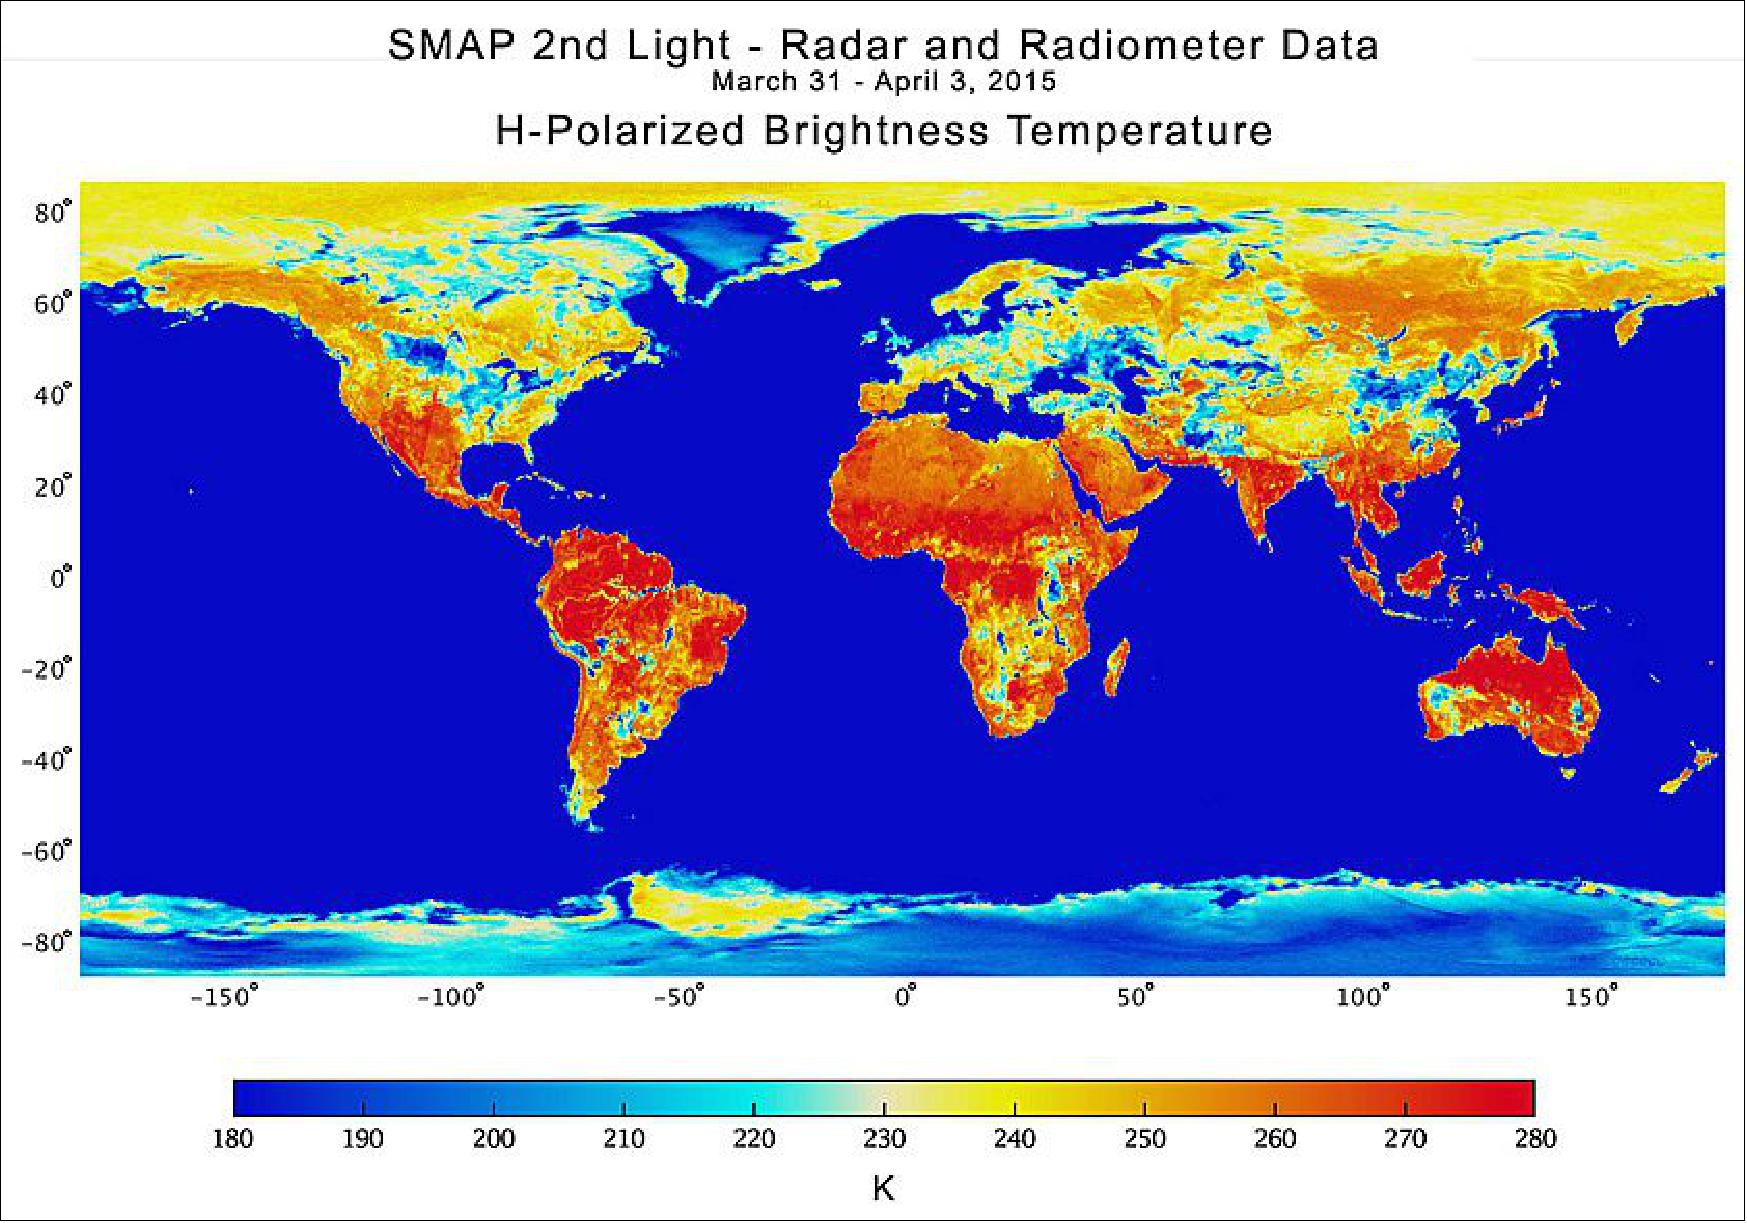 Figure 47: SMAP radar image acquired from data from March 31 to April 3, 2015. Weaker radar signals (blues) reflect low soil moisture or lack of vegetation, such as in deserts. Strong radar signals (reds) are seen in forests. SMAP's radar also takes data over the ocean and sea ice (image credit: NASA/JPL,Caltech, GSFC)